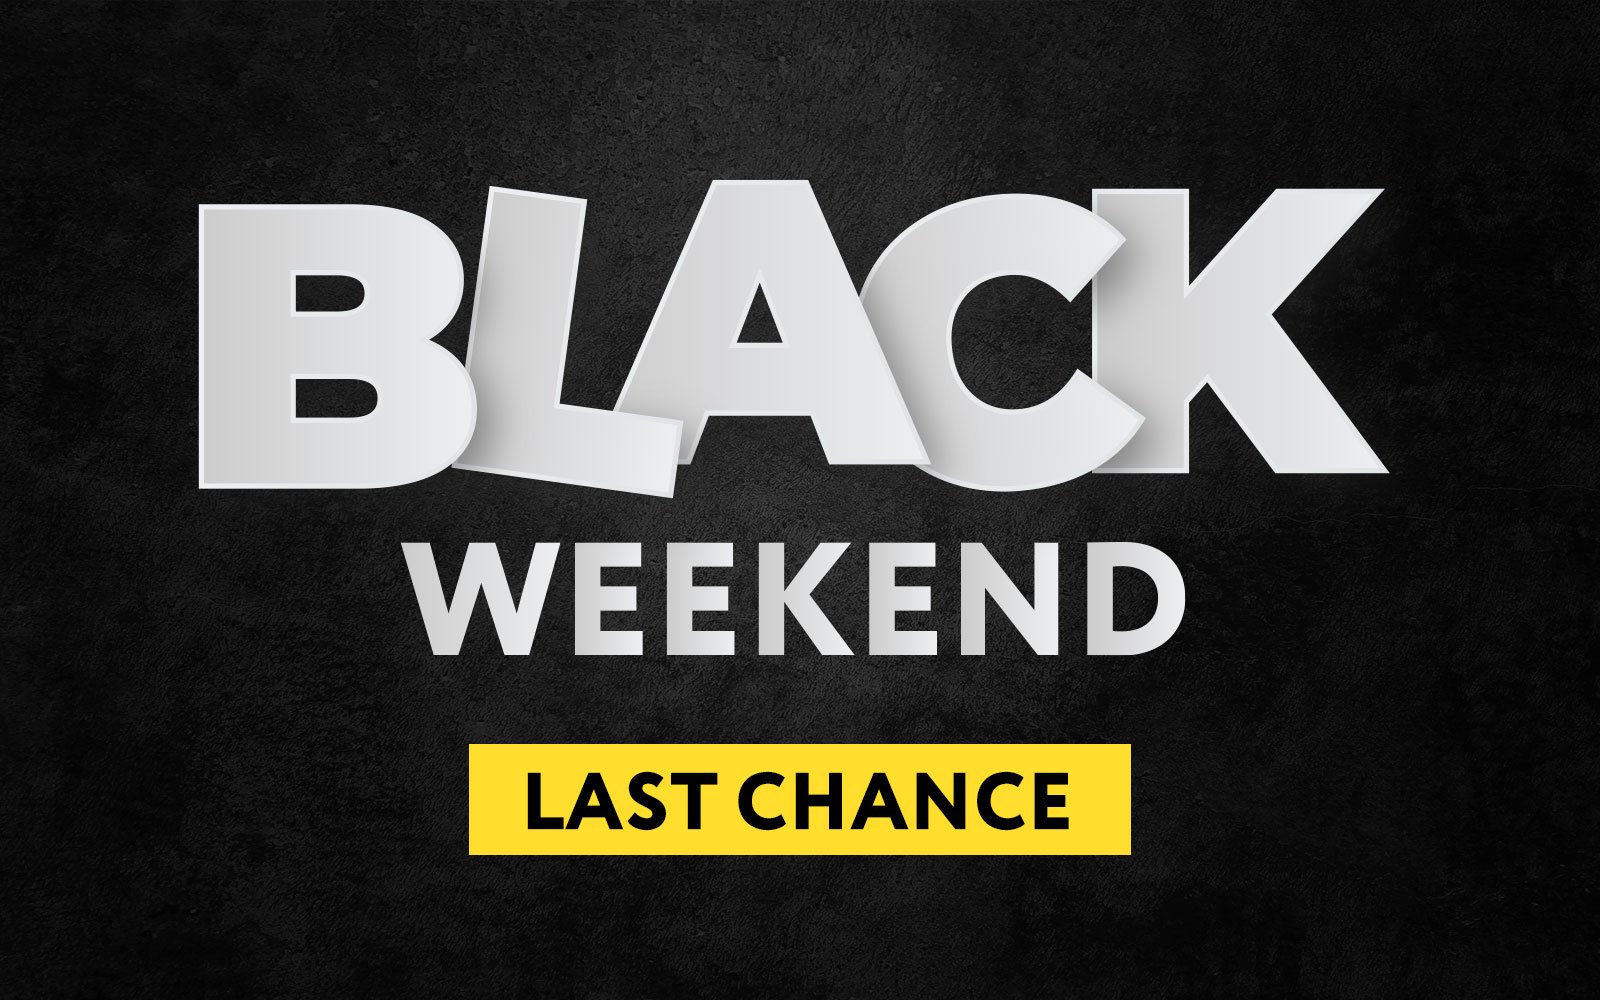 LAST CHANCE - THE ABRITES BLACK WEEKEND ENDS TONIGHT!